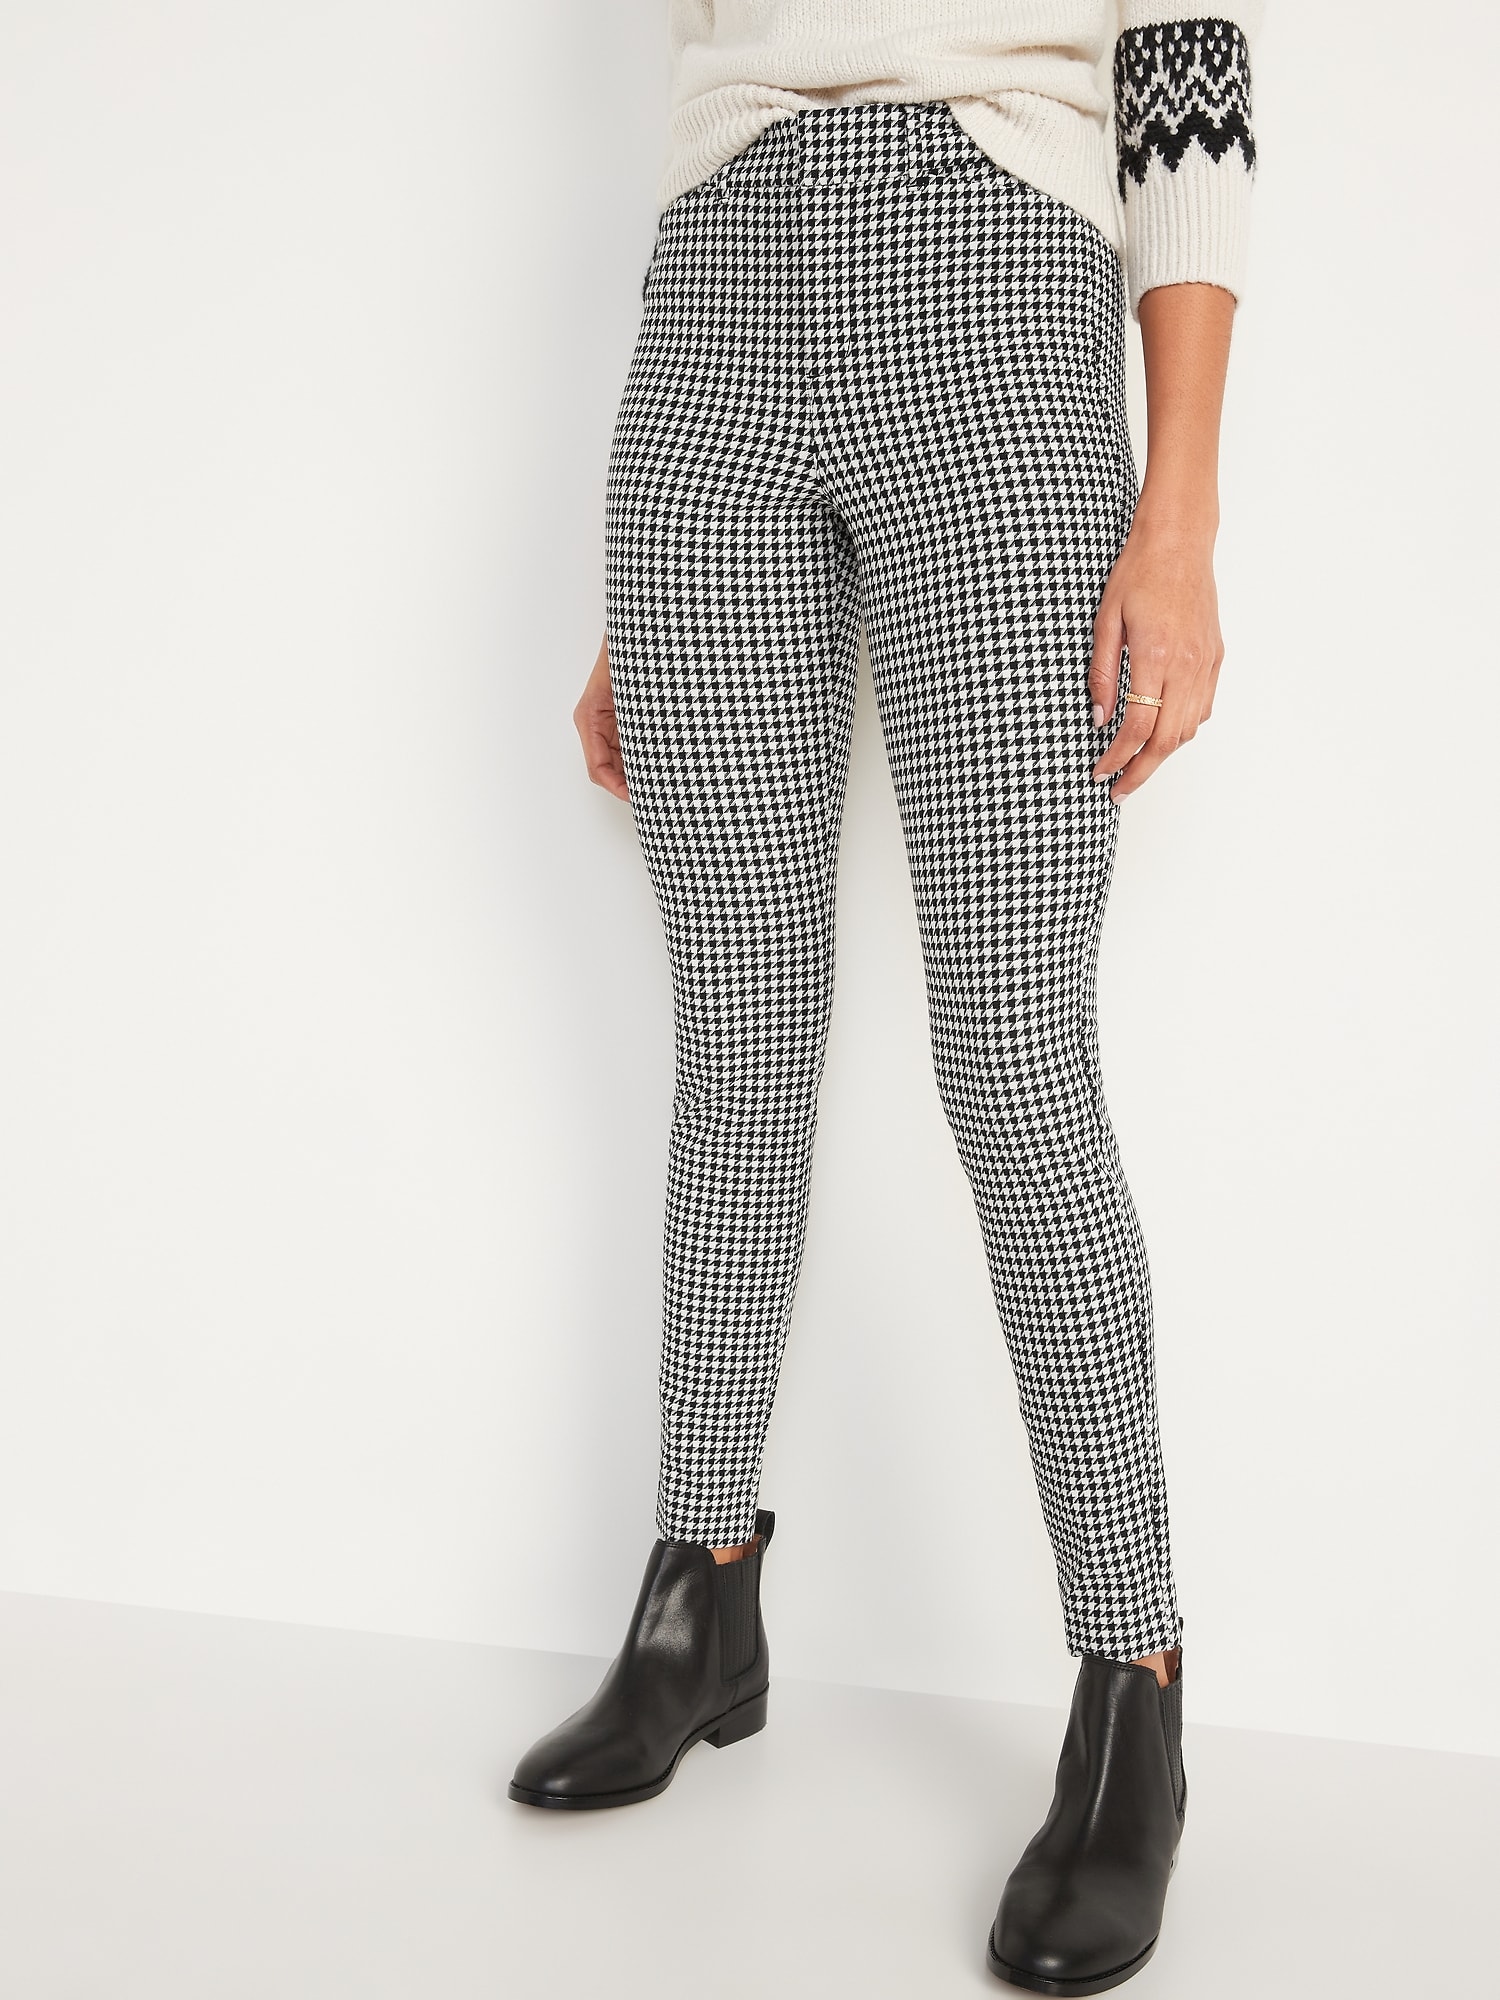 High-Waisted Houndstooth Pixie Skinny Pants for Women | Old Navy